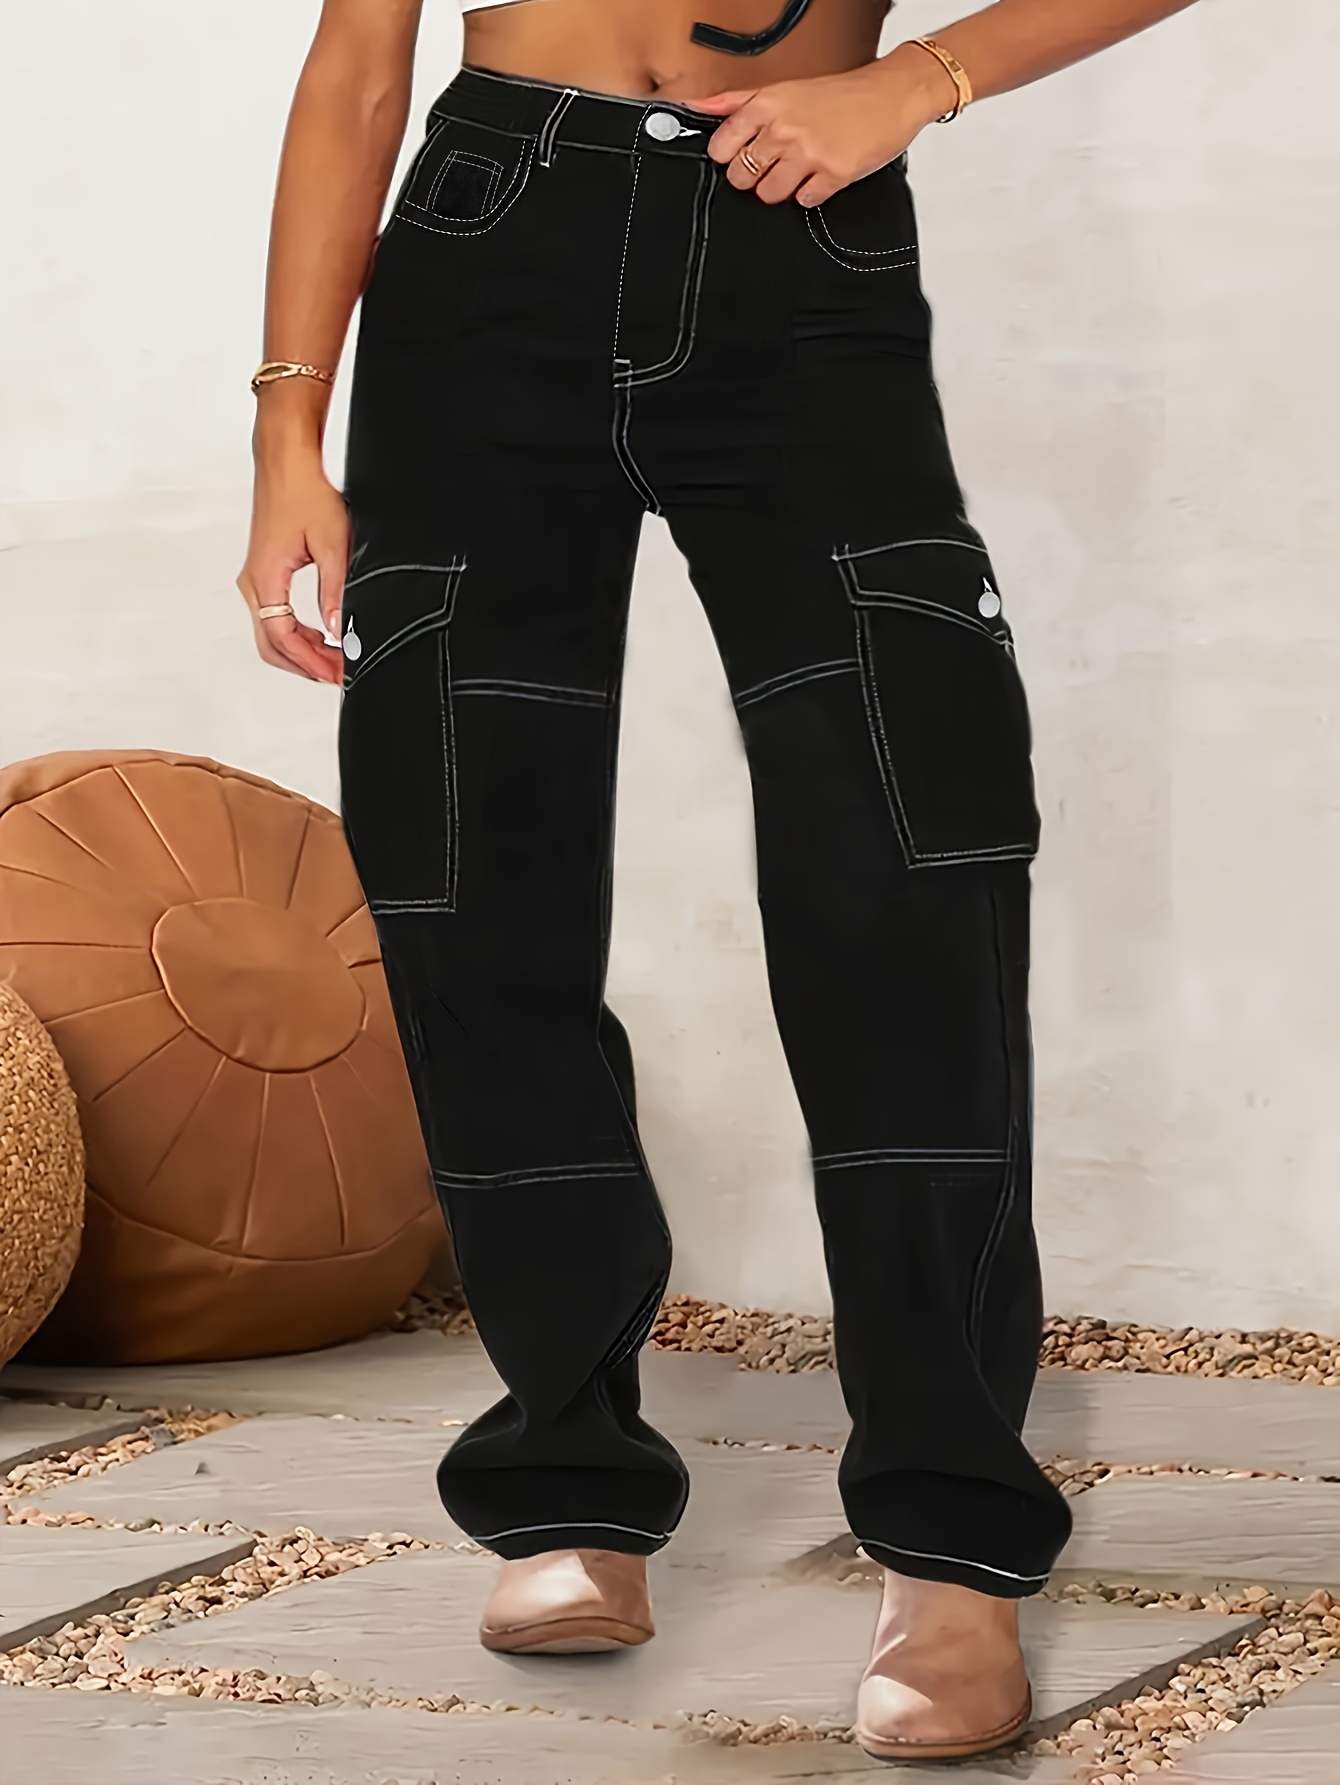 casual black denim baggy pants for girls and womens.